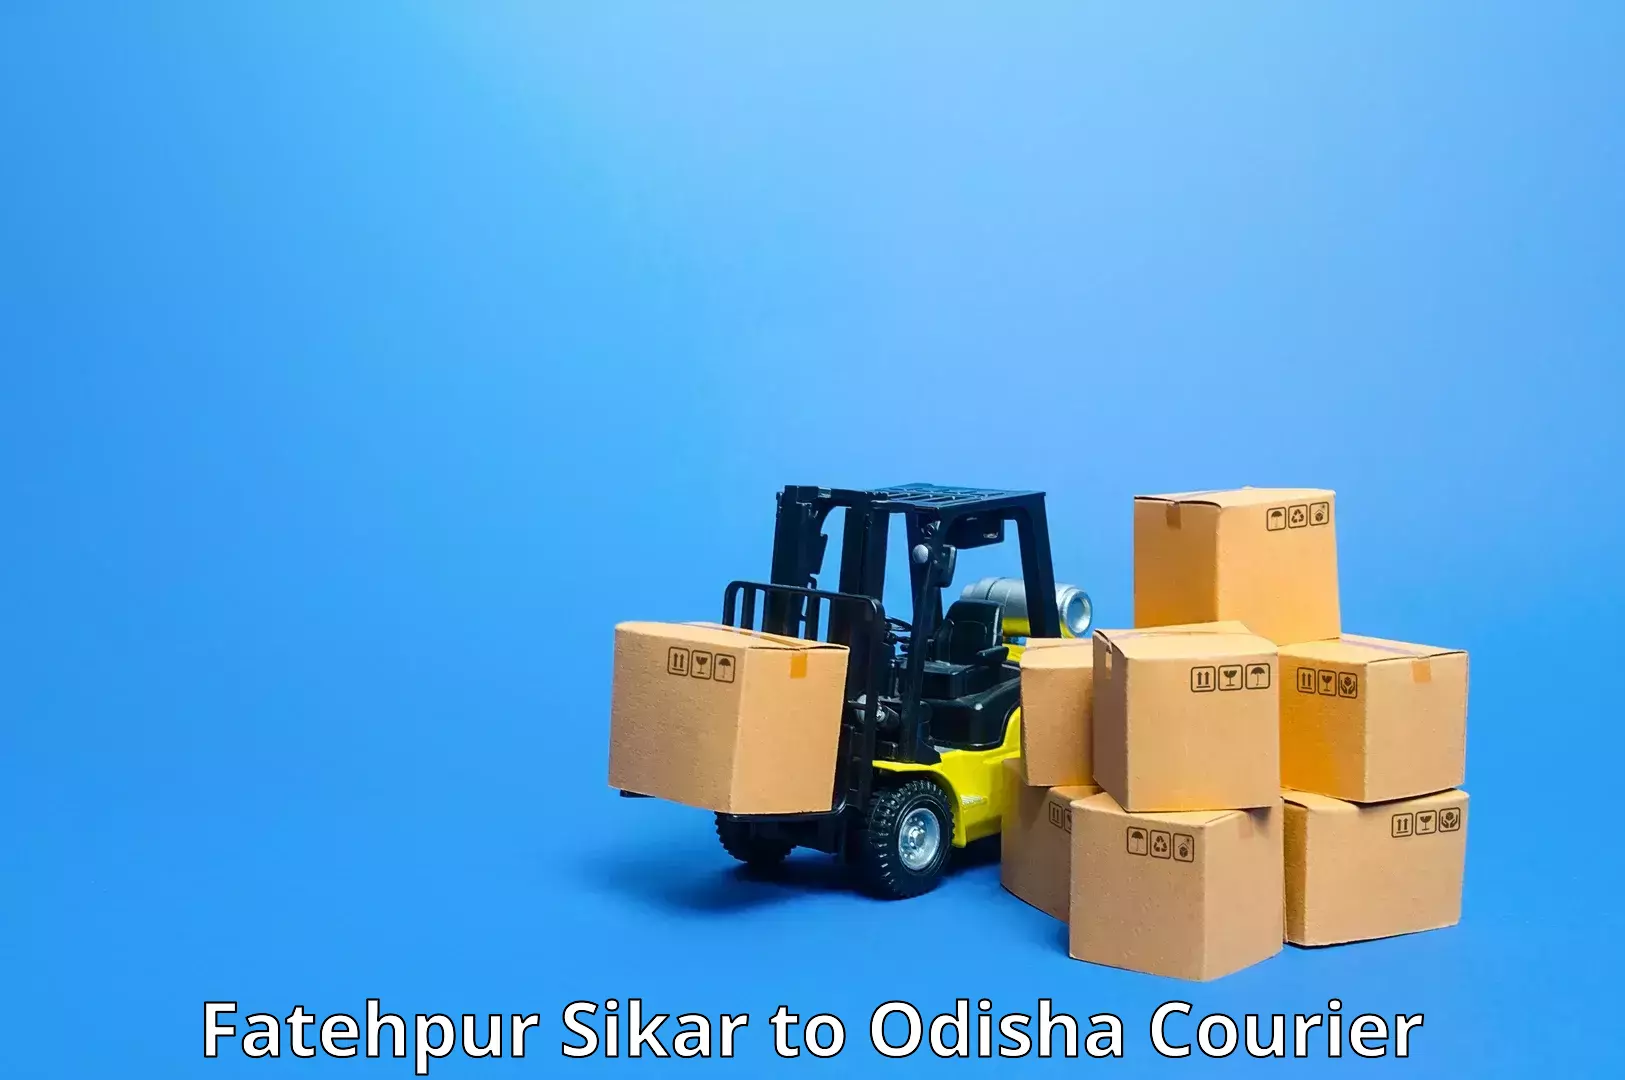 Efficient shipping operations Fatehpur Sikar to Asika